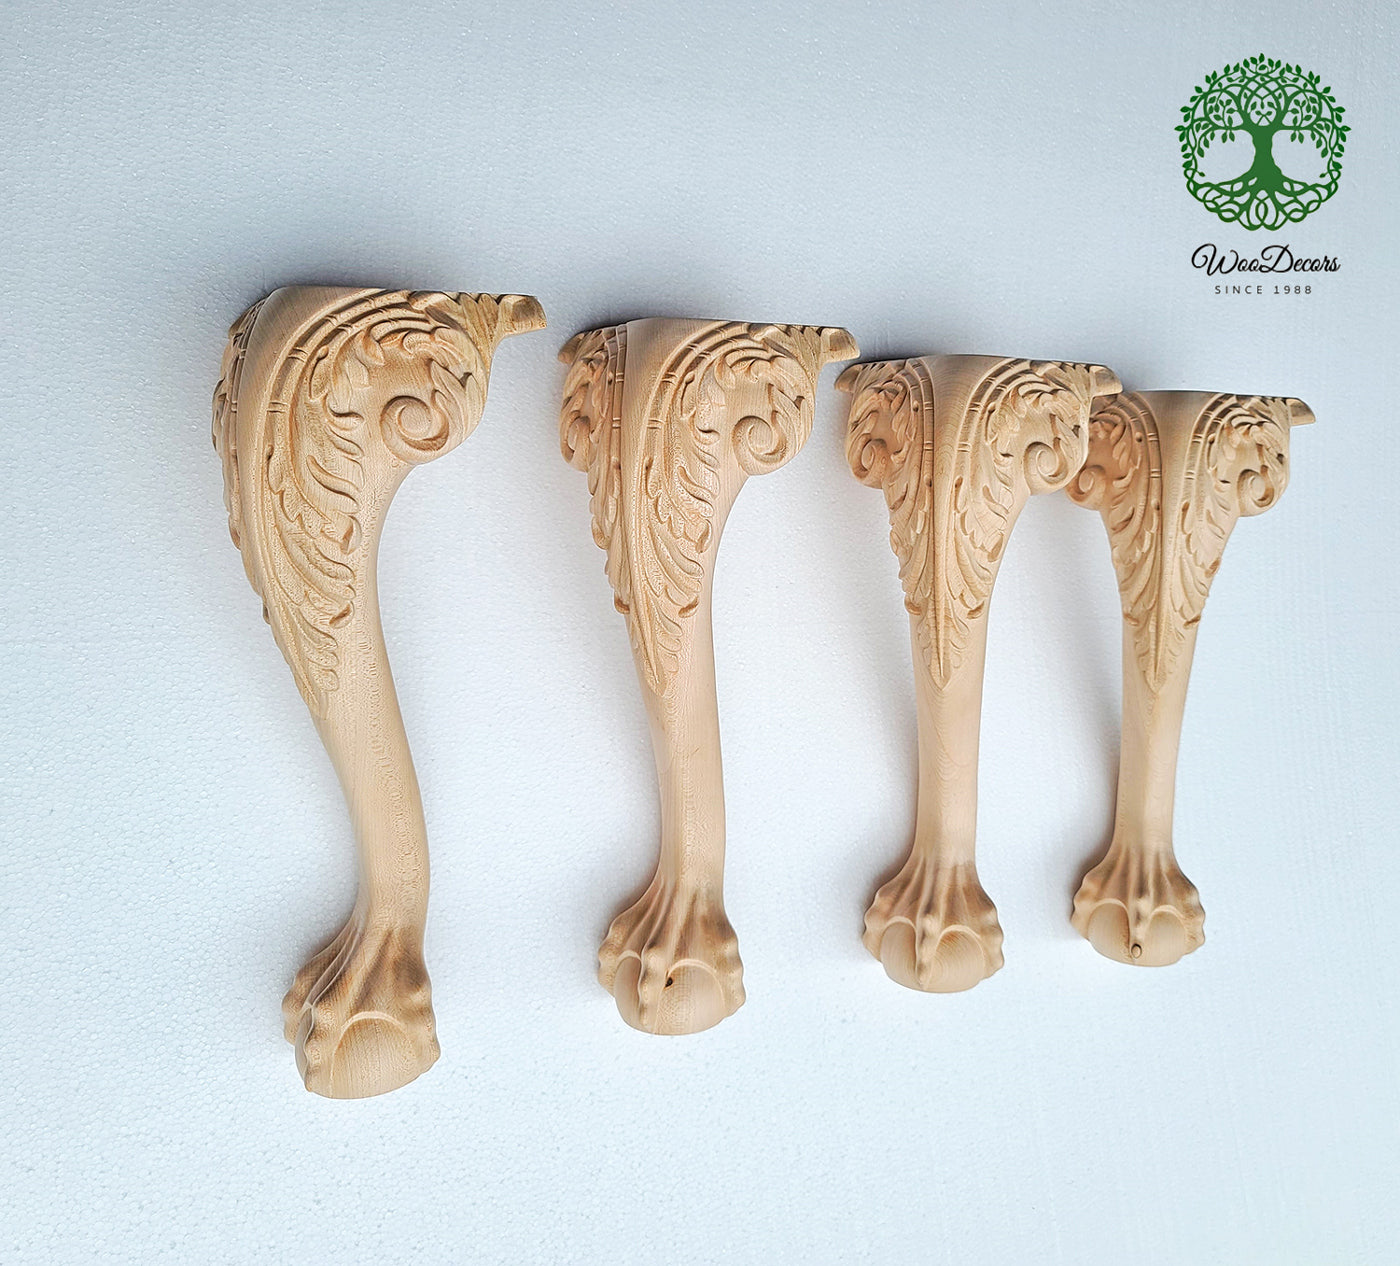 PAIR of Wood Carved Scroll Leaf Claw Ball Legs for Furniture, from 10" to 16-1/2" high